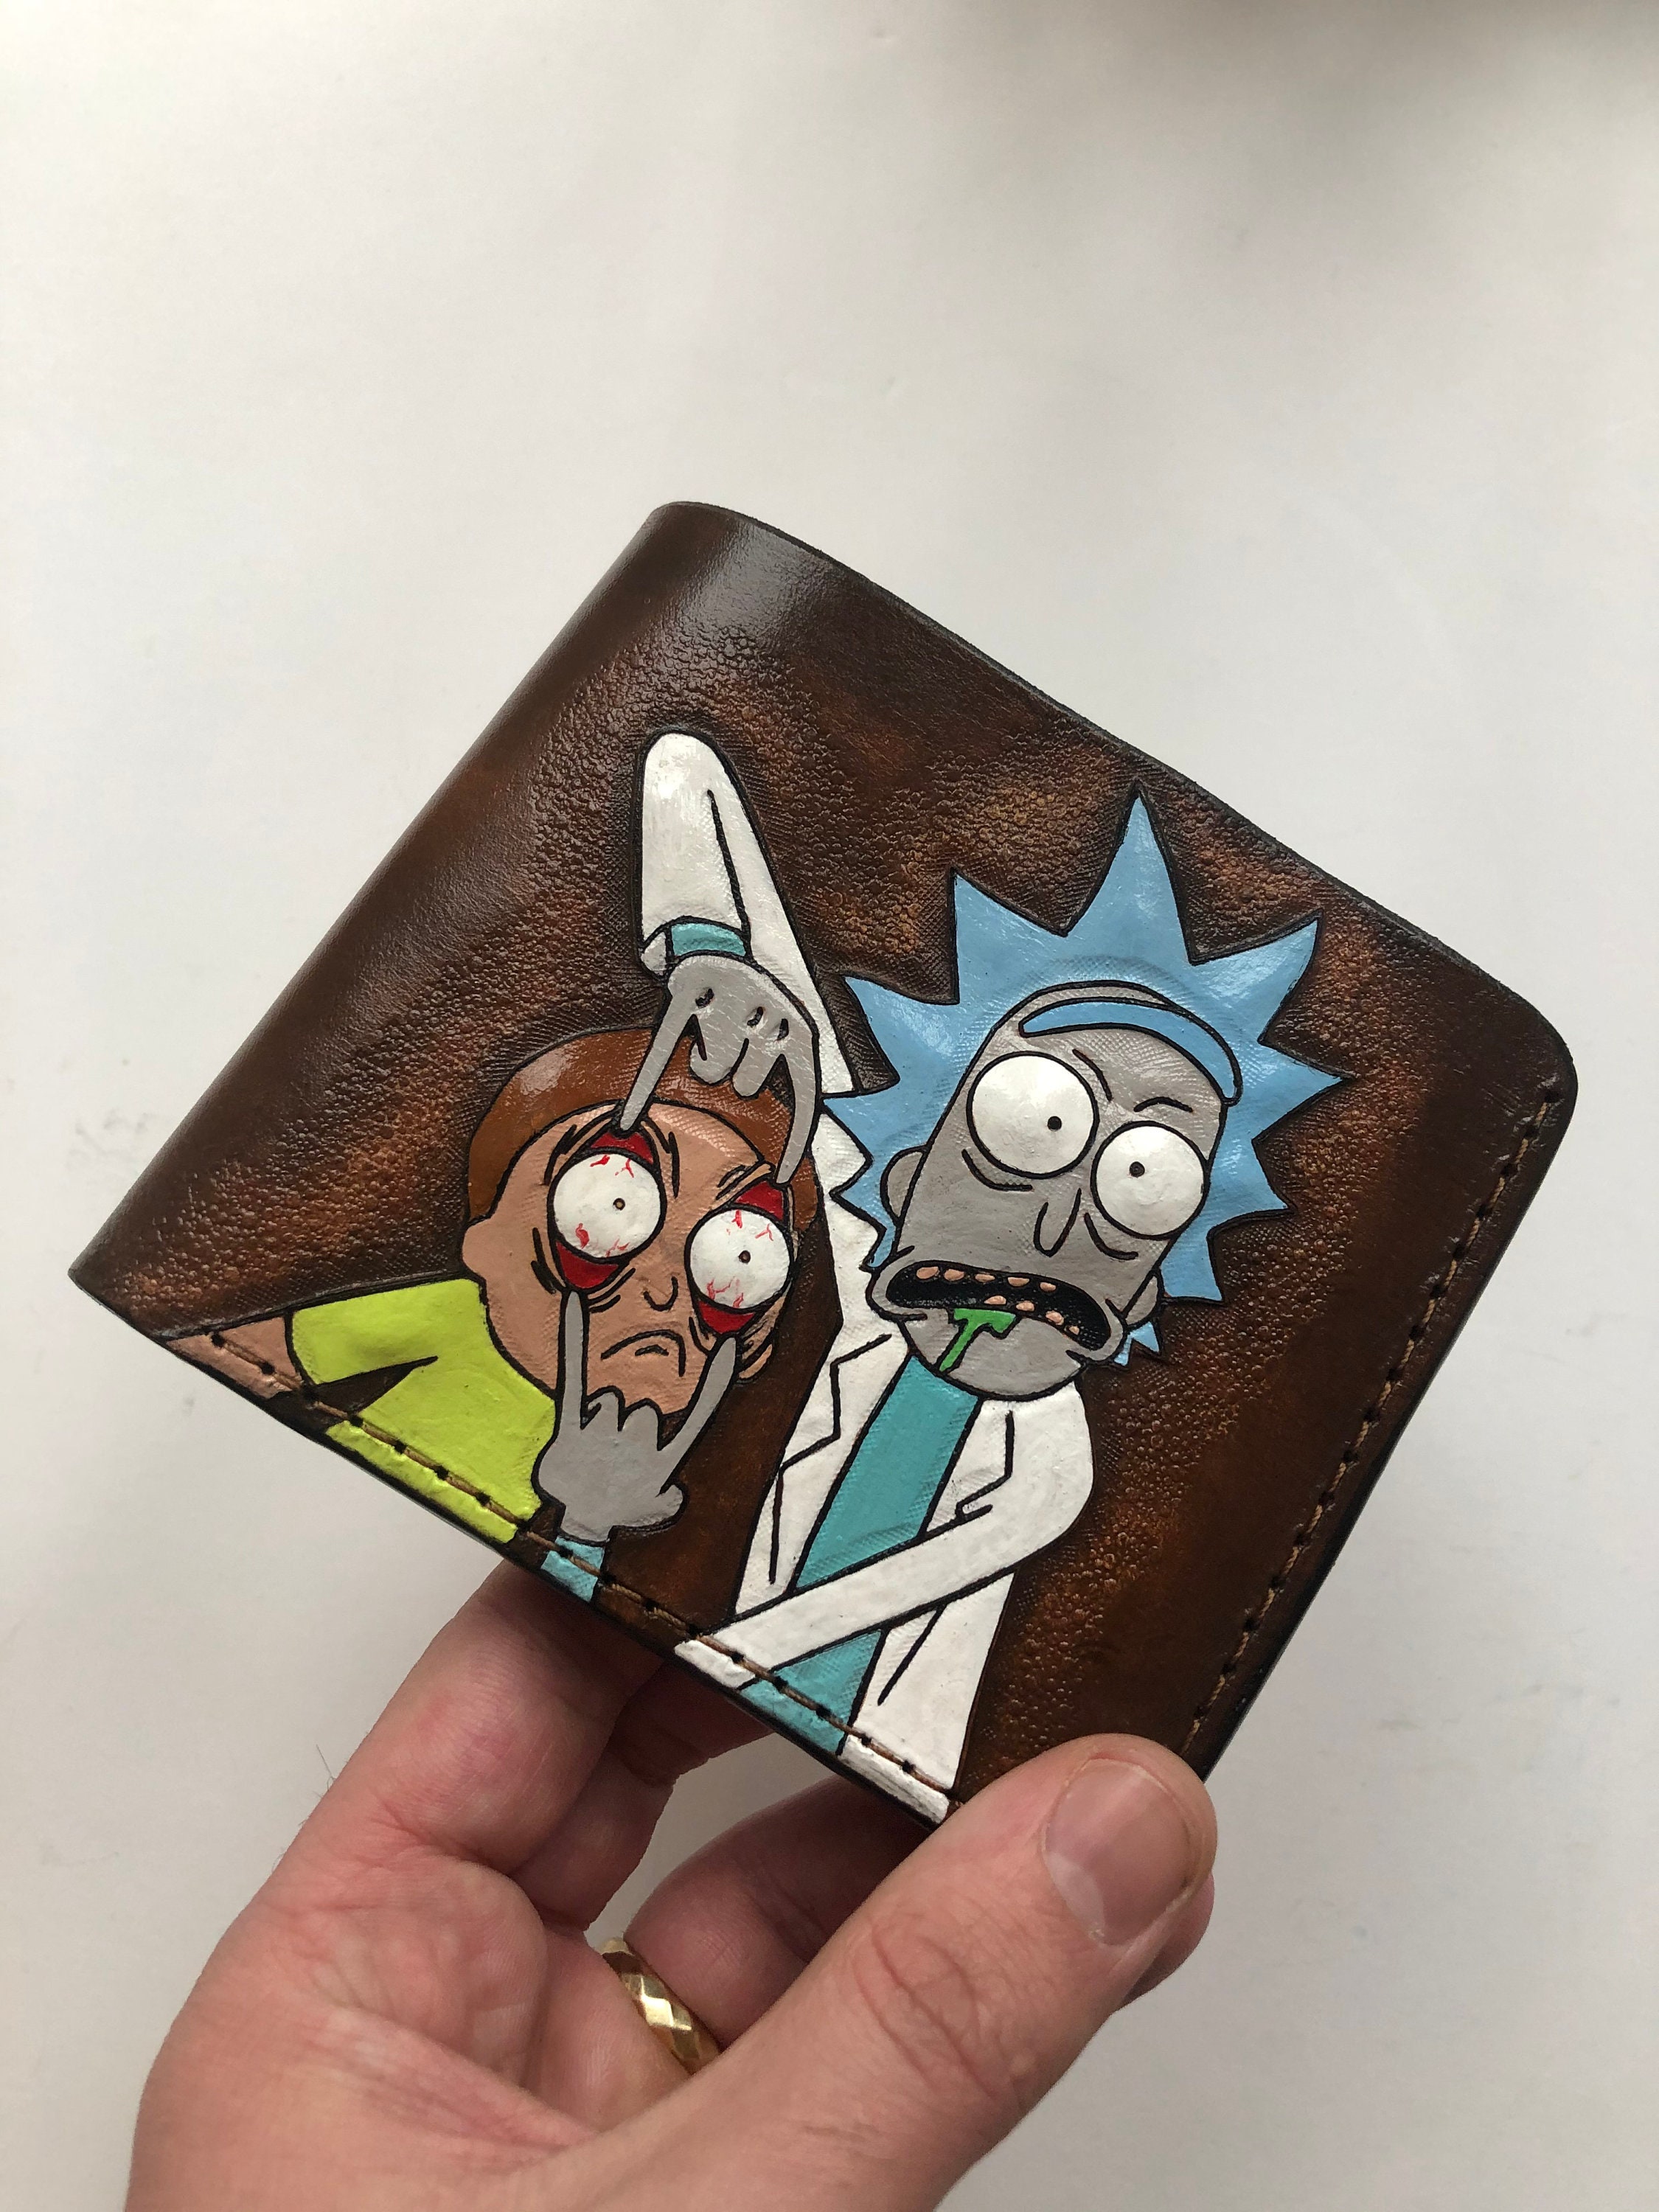 I upcycled a leather wallet by painting some portal stuffs : r/rickandmorty